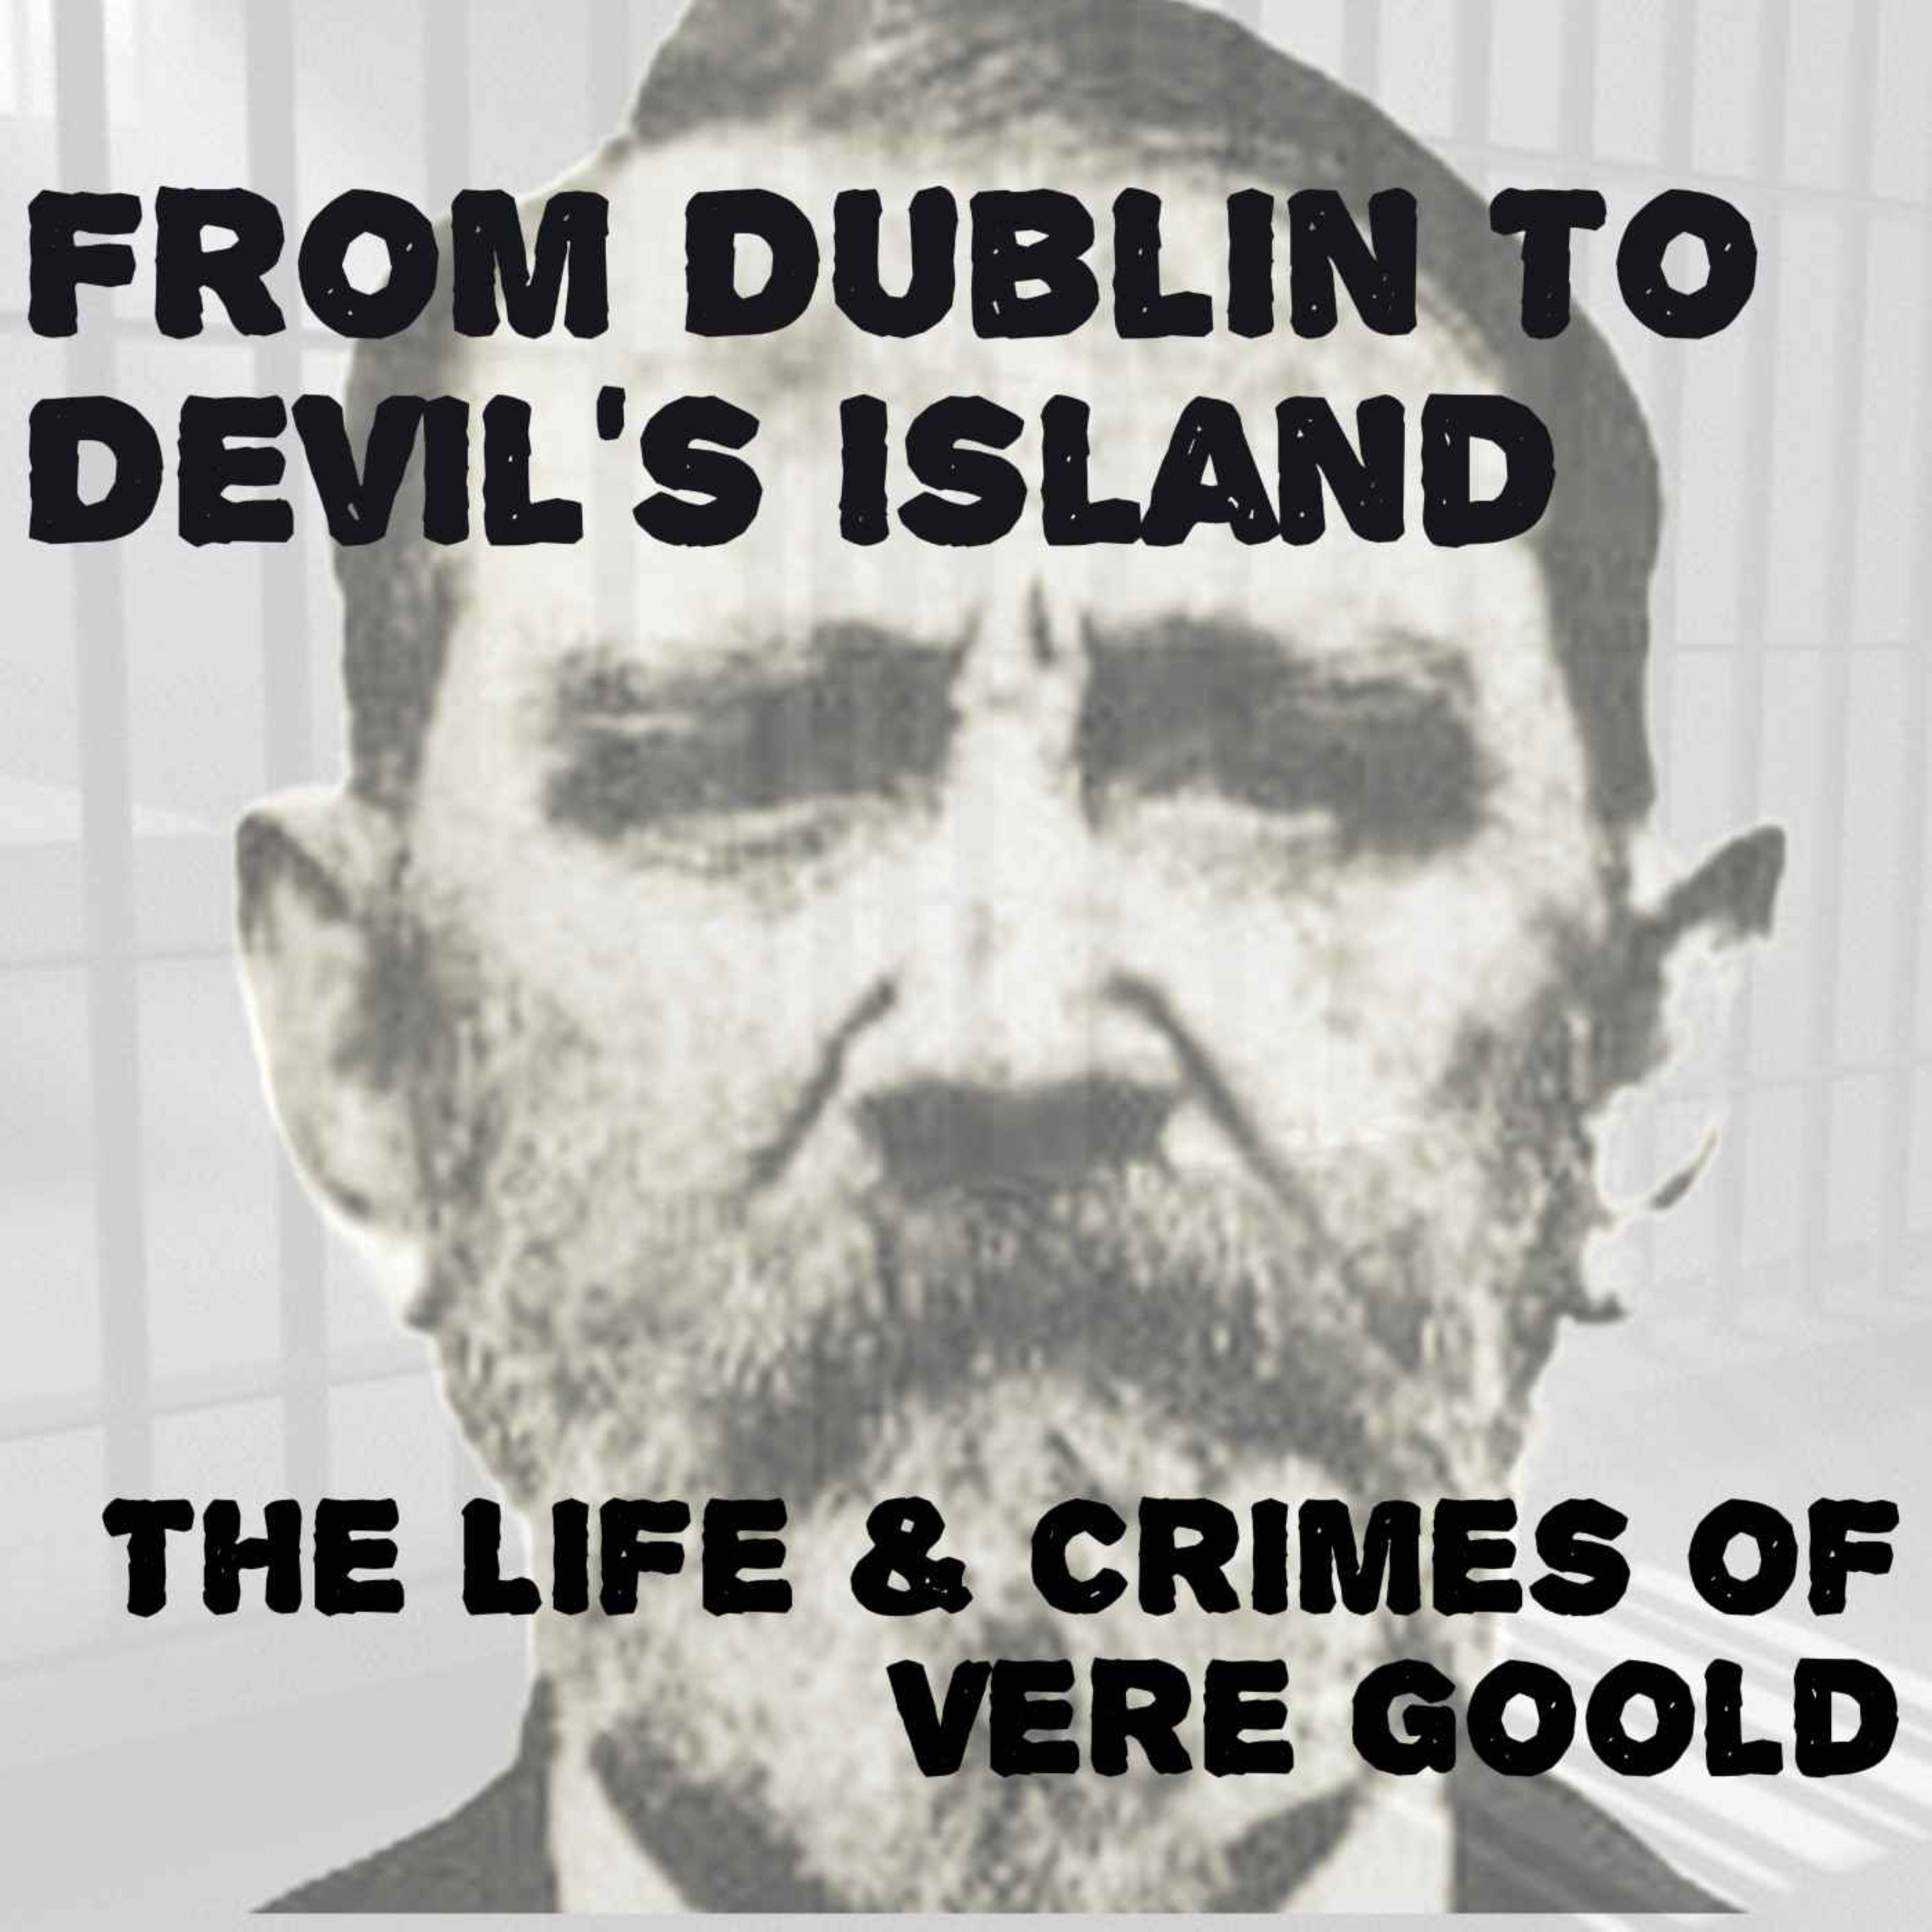 From Dublin to Devil’s Island - The Life & Crimes of Vere Goold